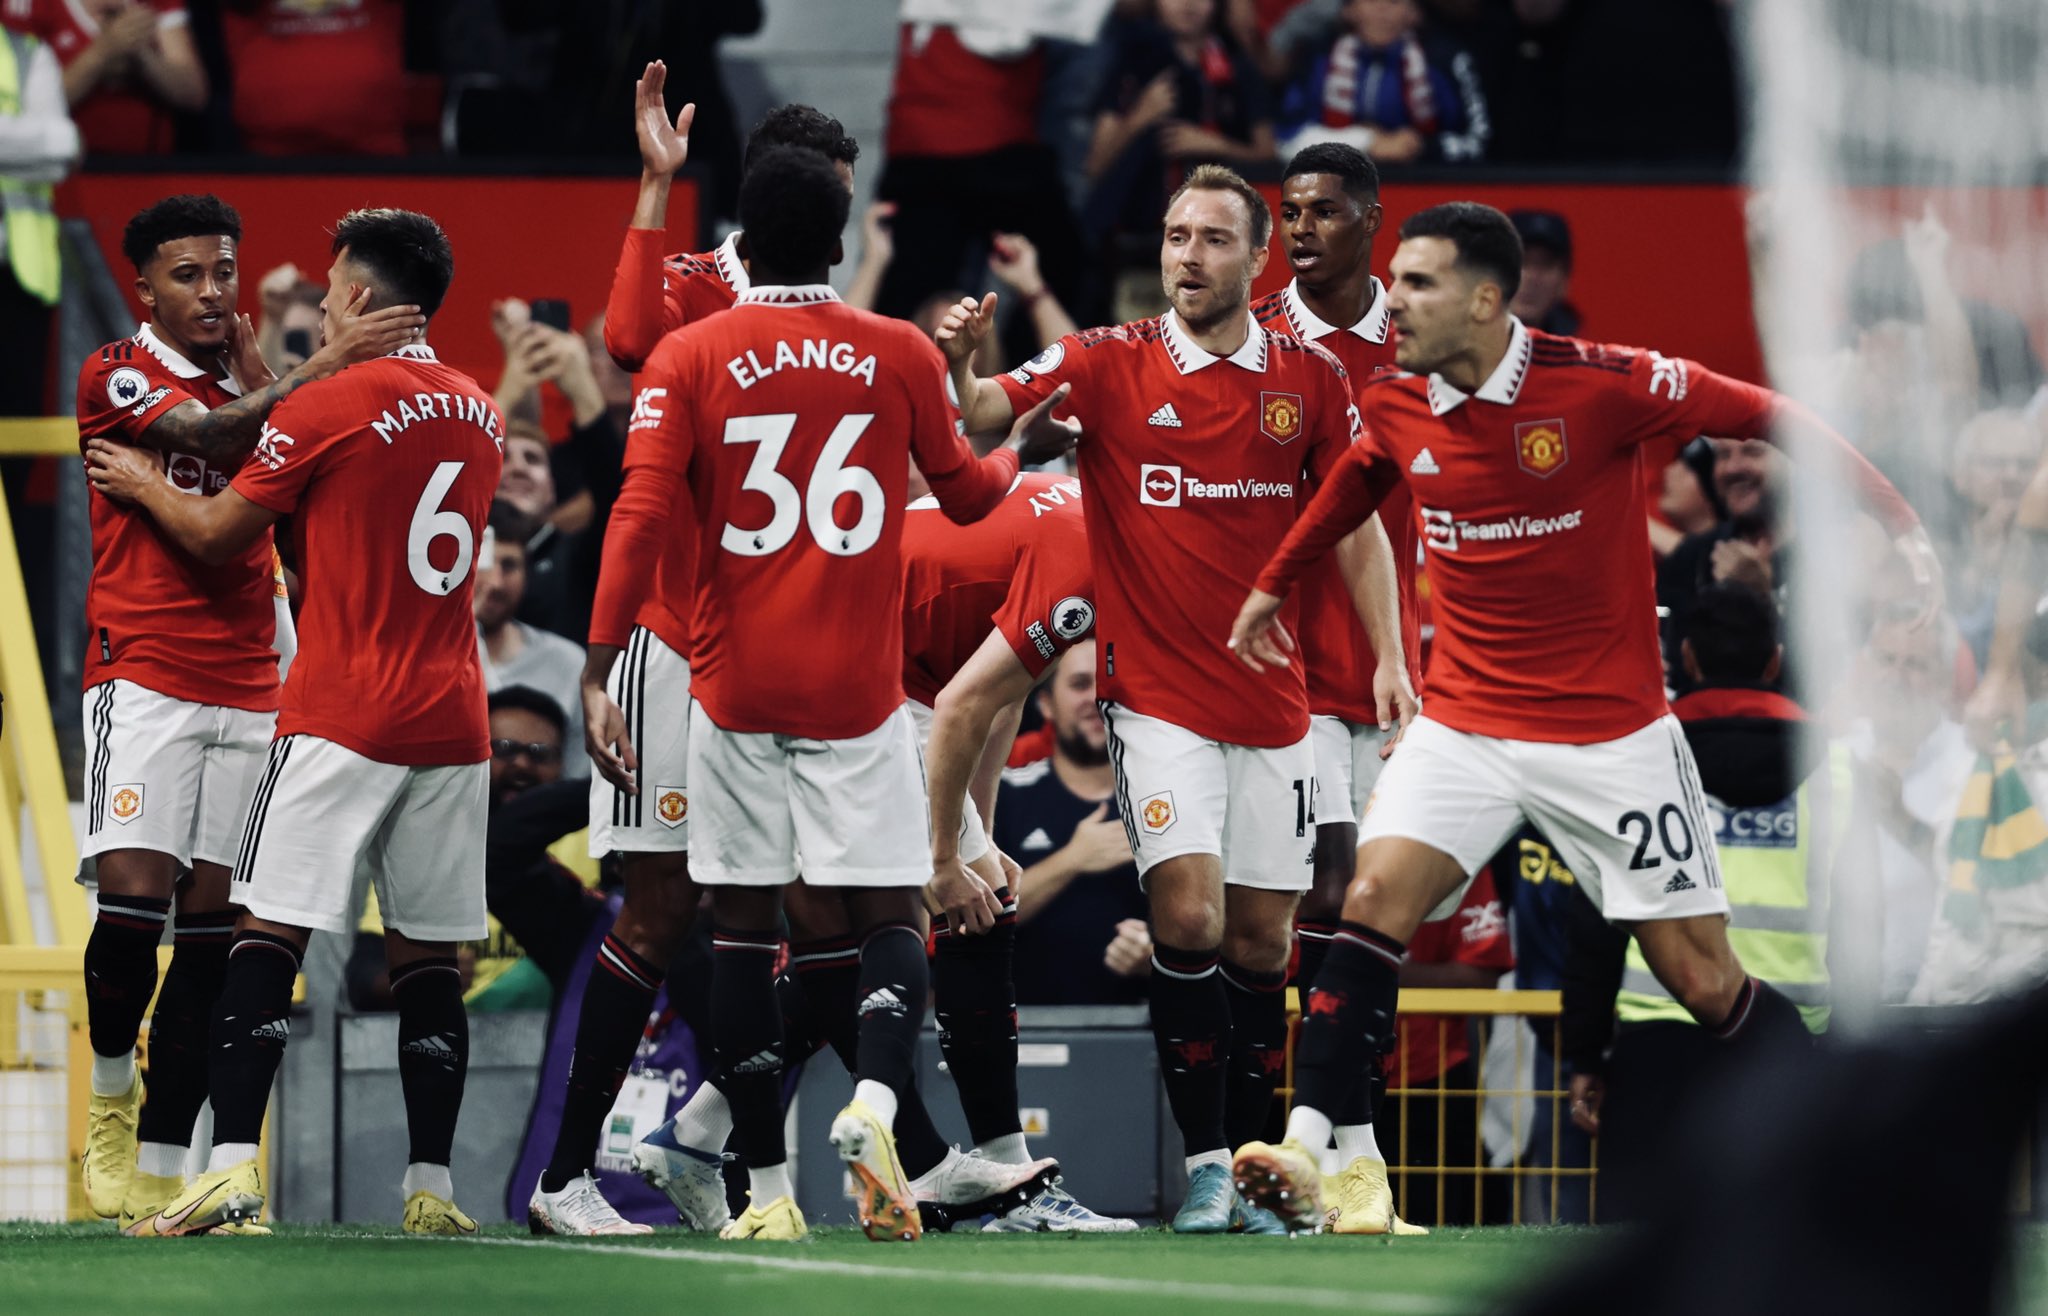 Manchester United celebrate their first Premier League victory of the season